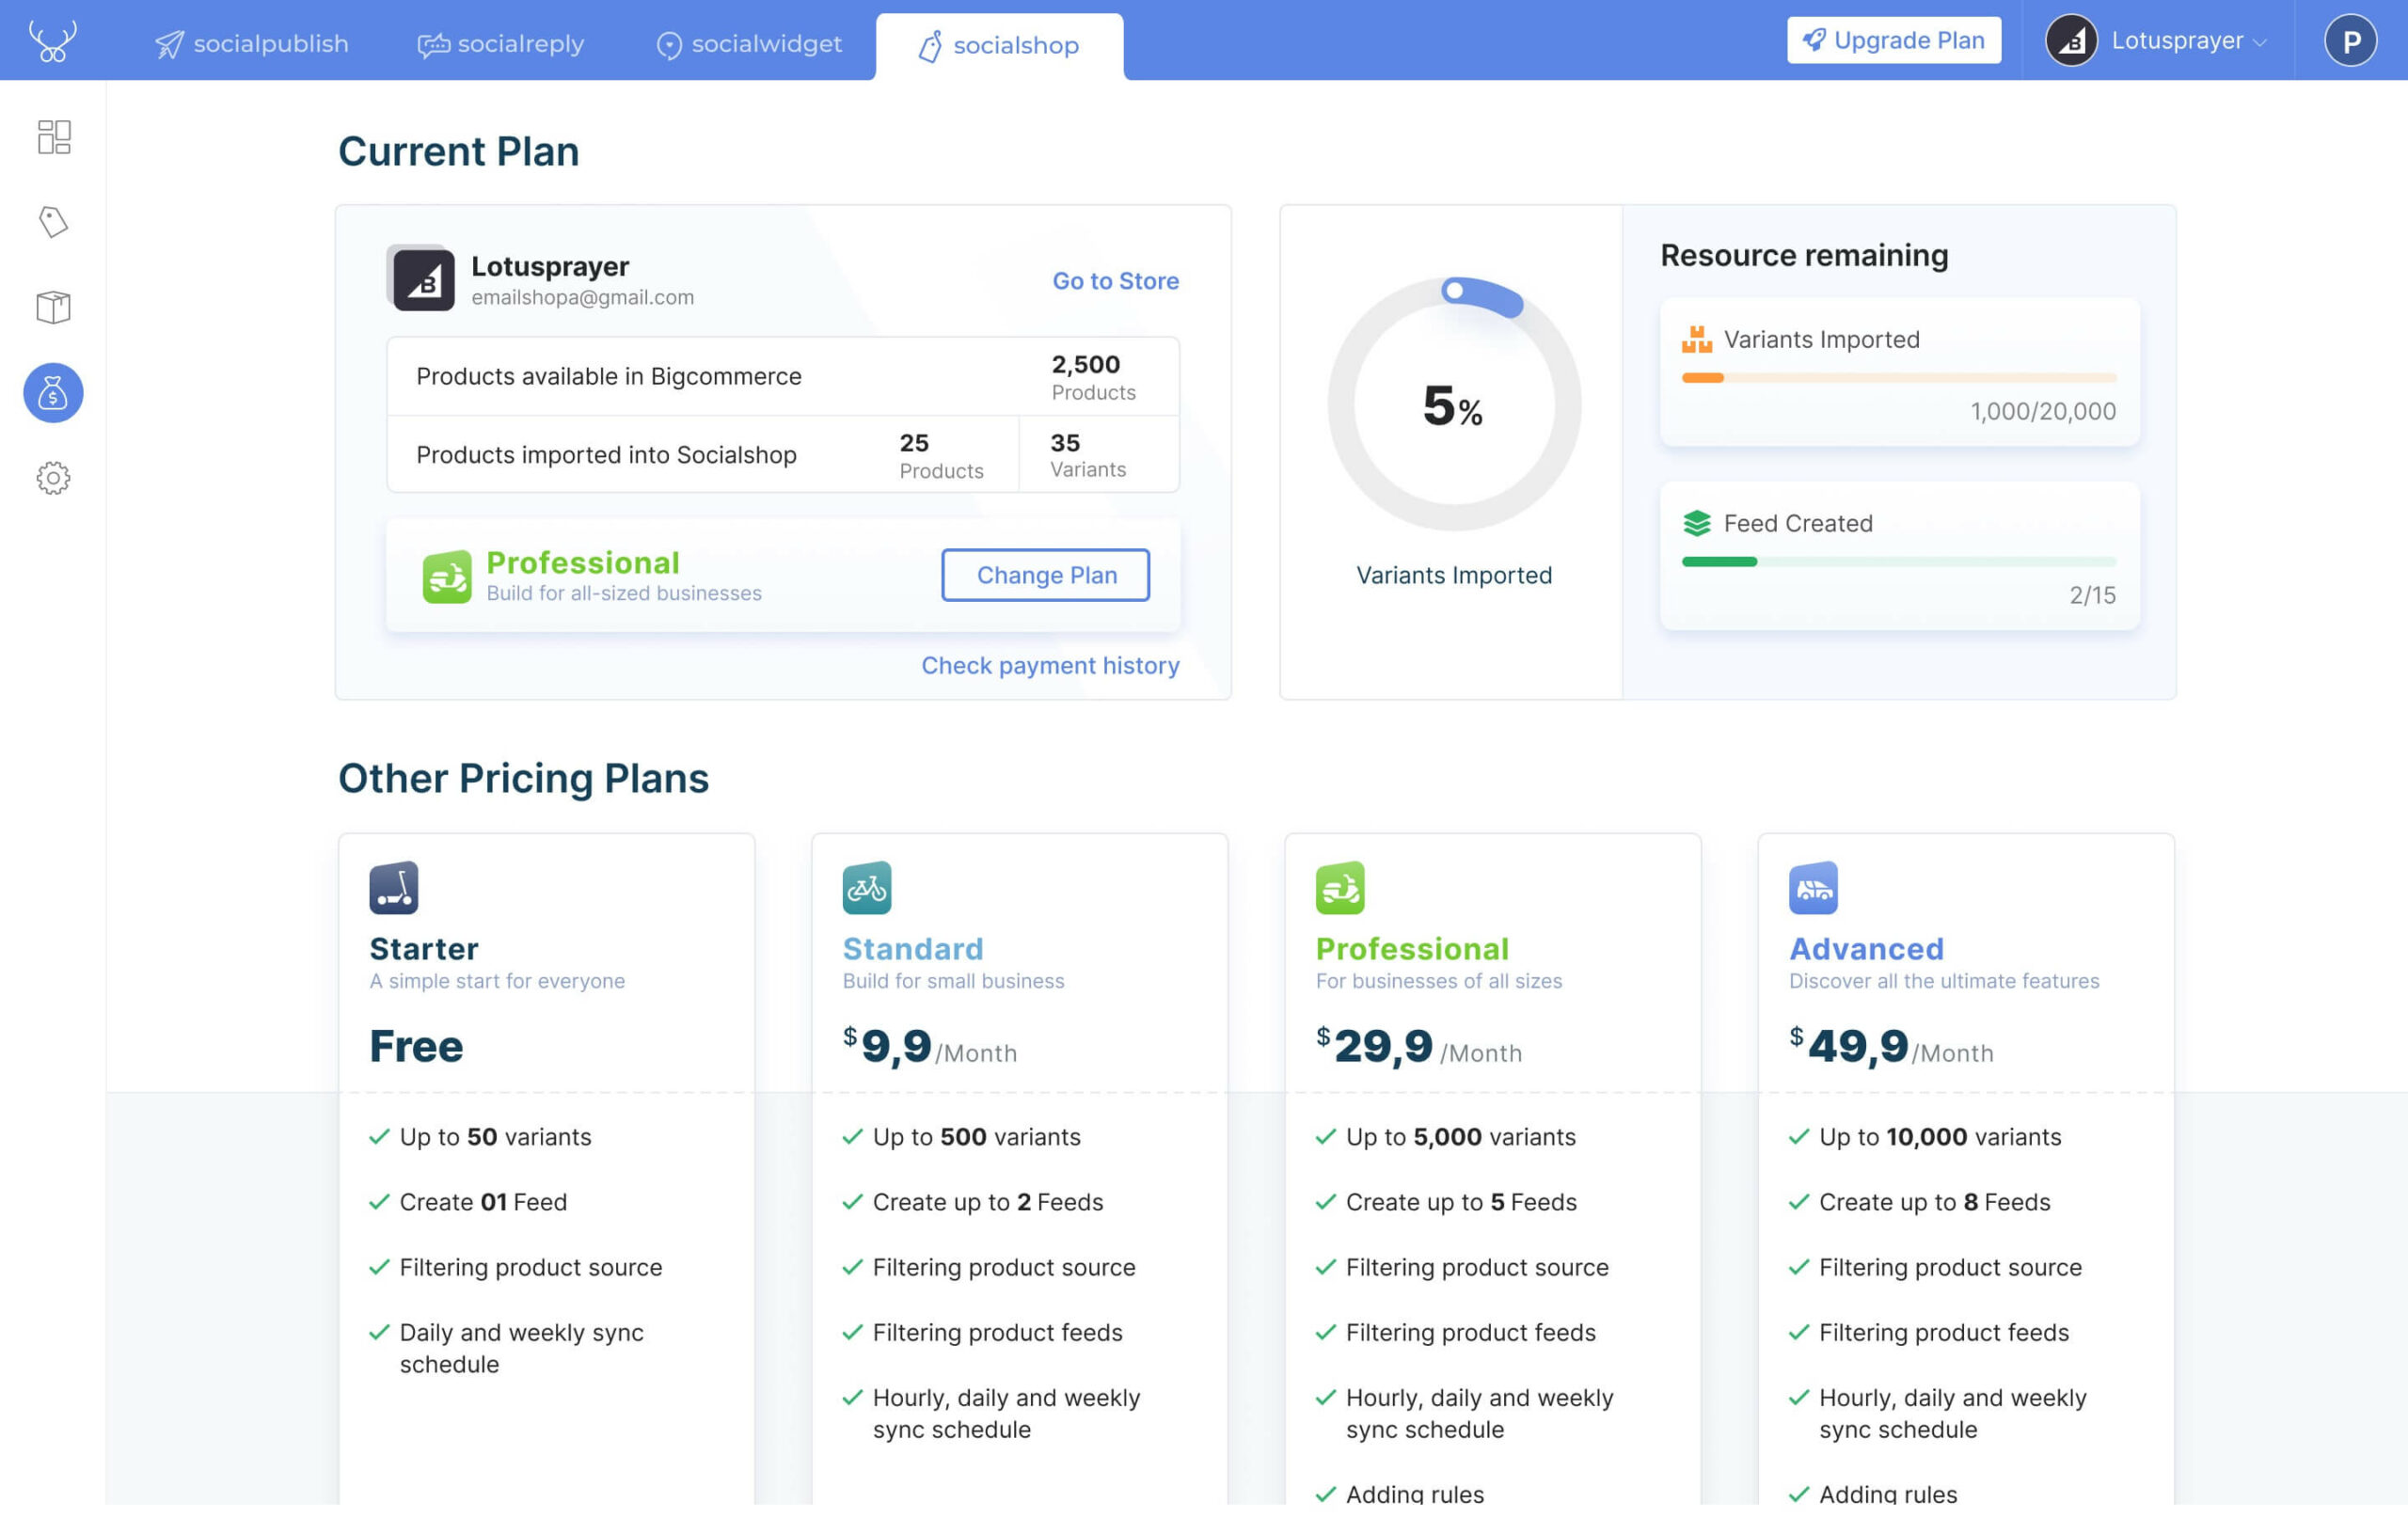 Take a look at our pricing plans put side-by-side